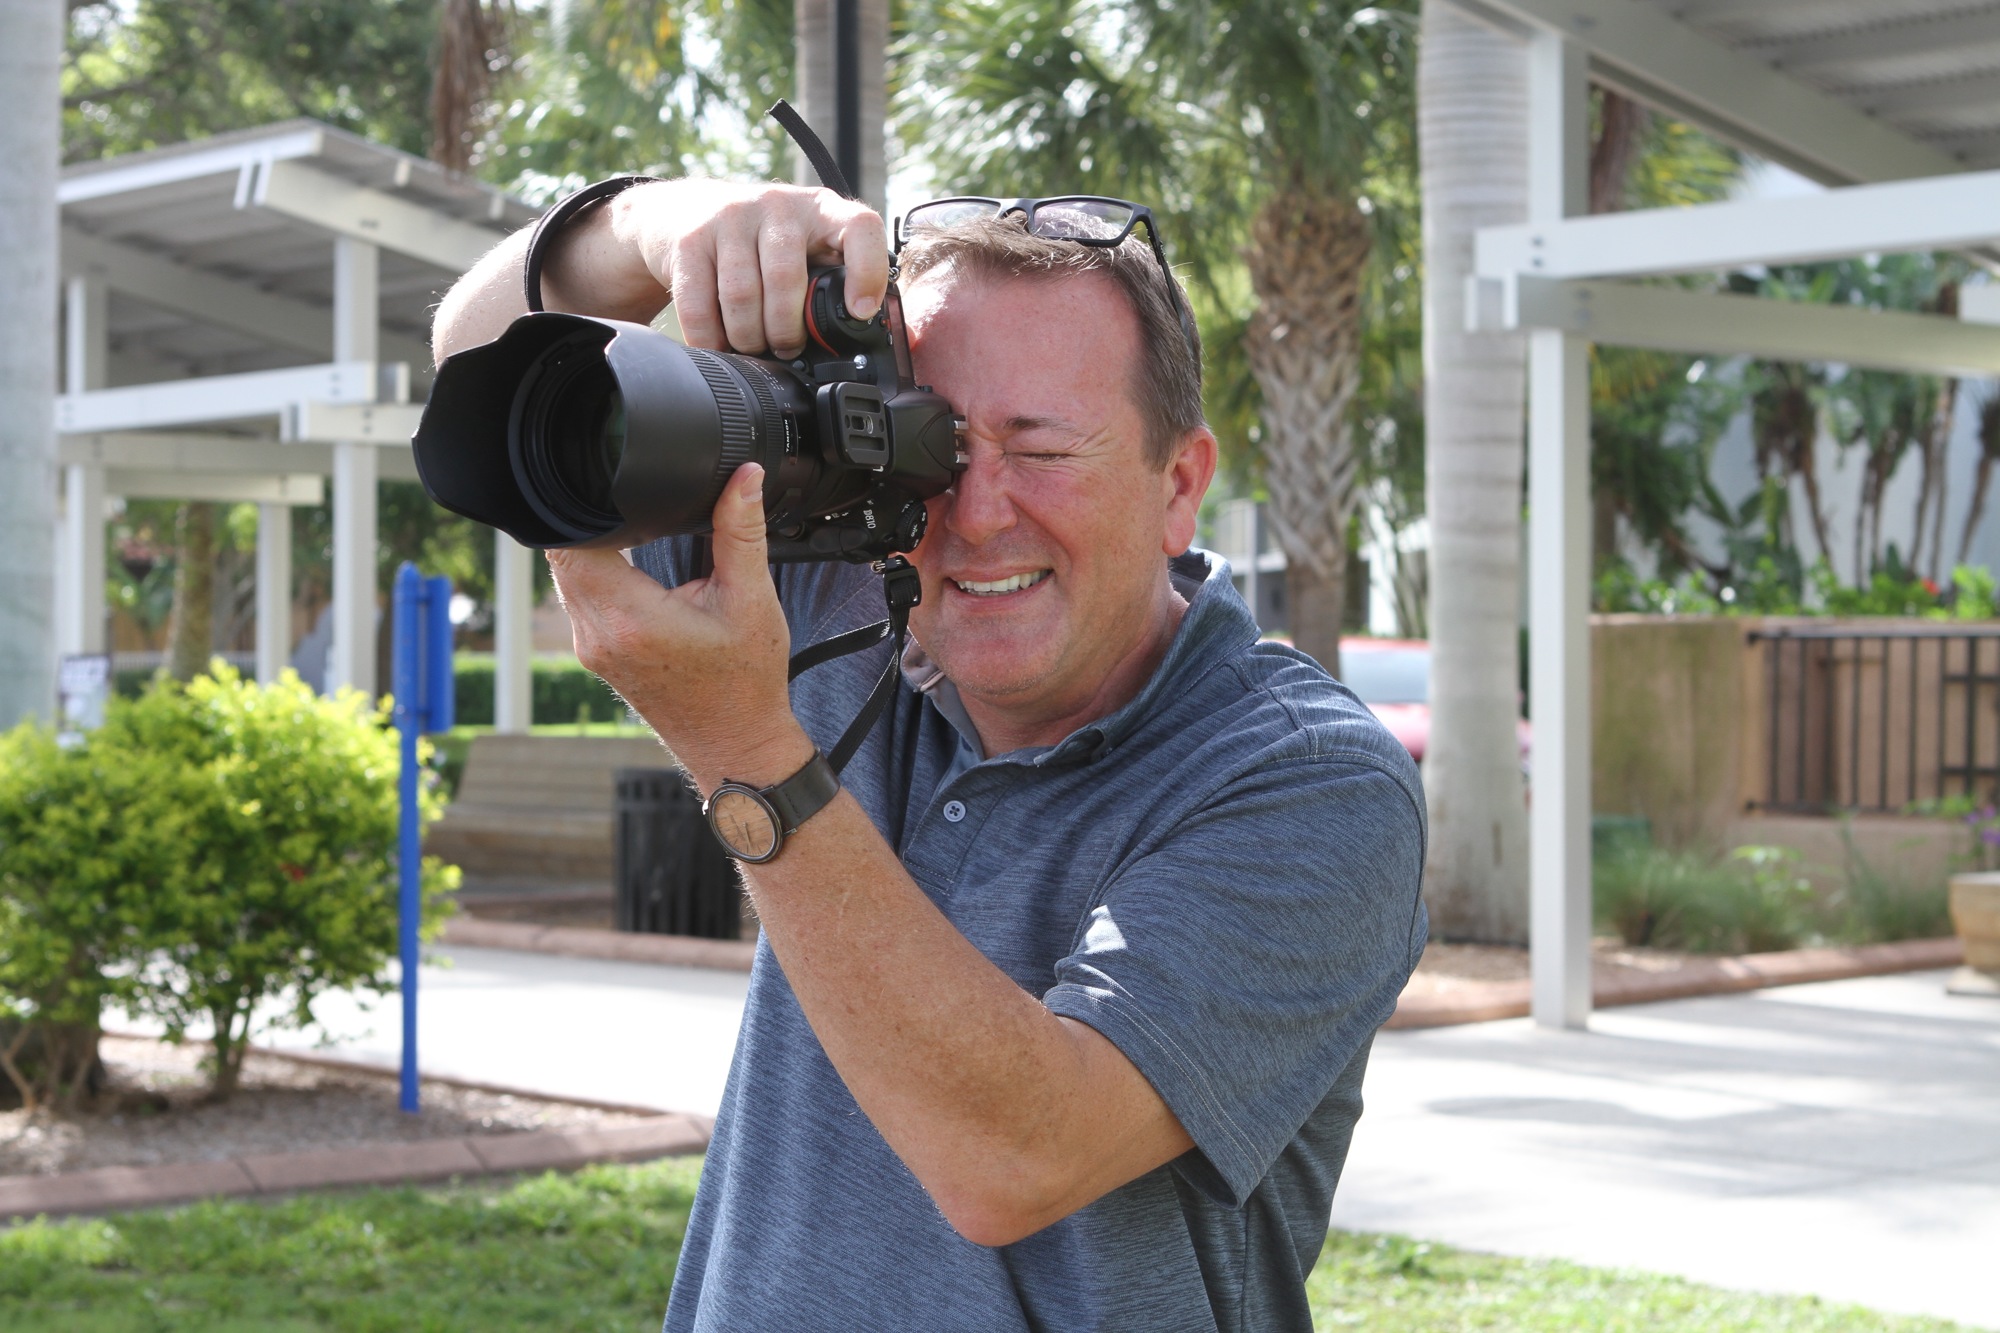 Acker deeply treasures his responsibility as a photographer. Photo by Harry Sayer.